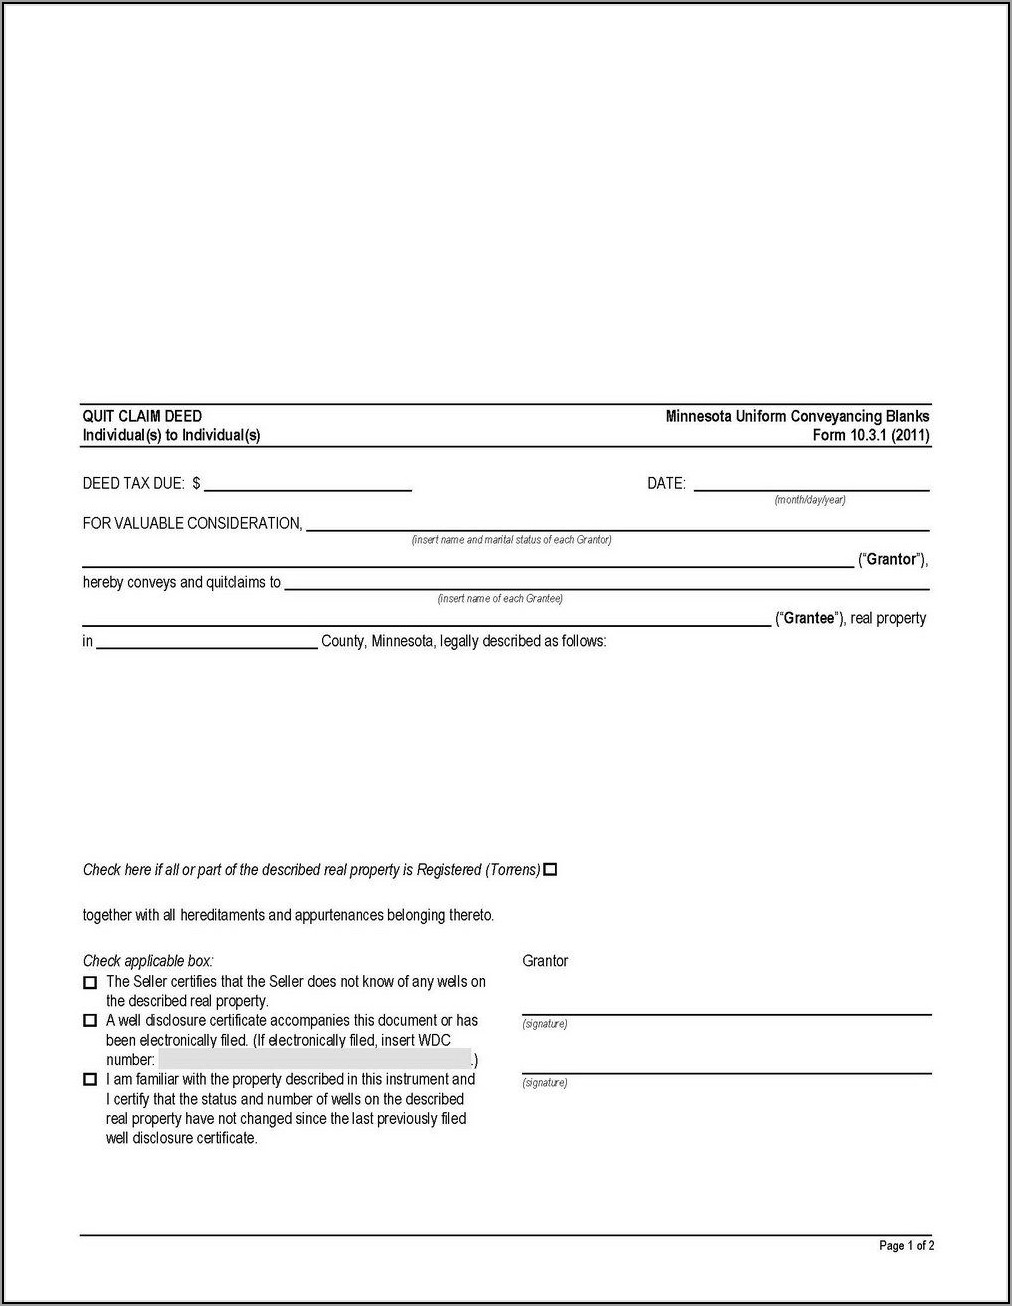 indiana-quit-claim-deed-forms-form-resume-examples-ojyqwjq2zl